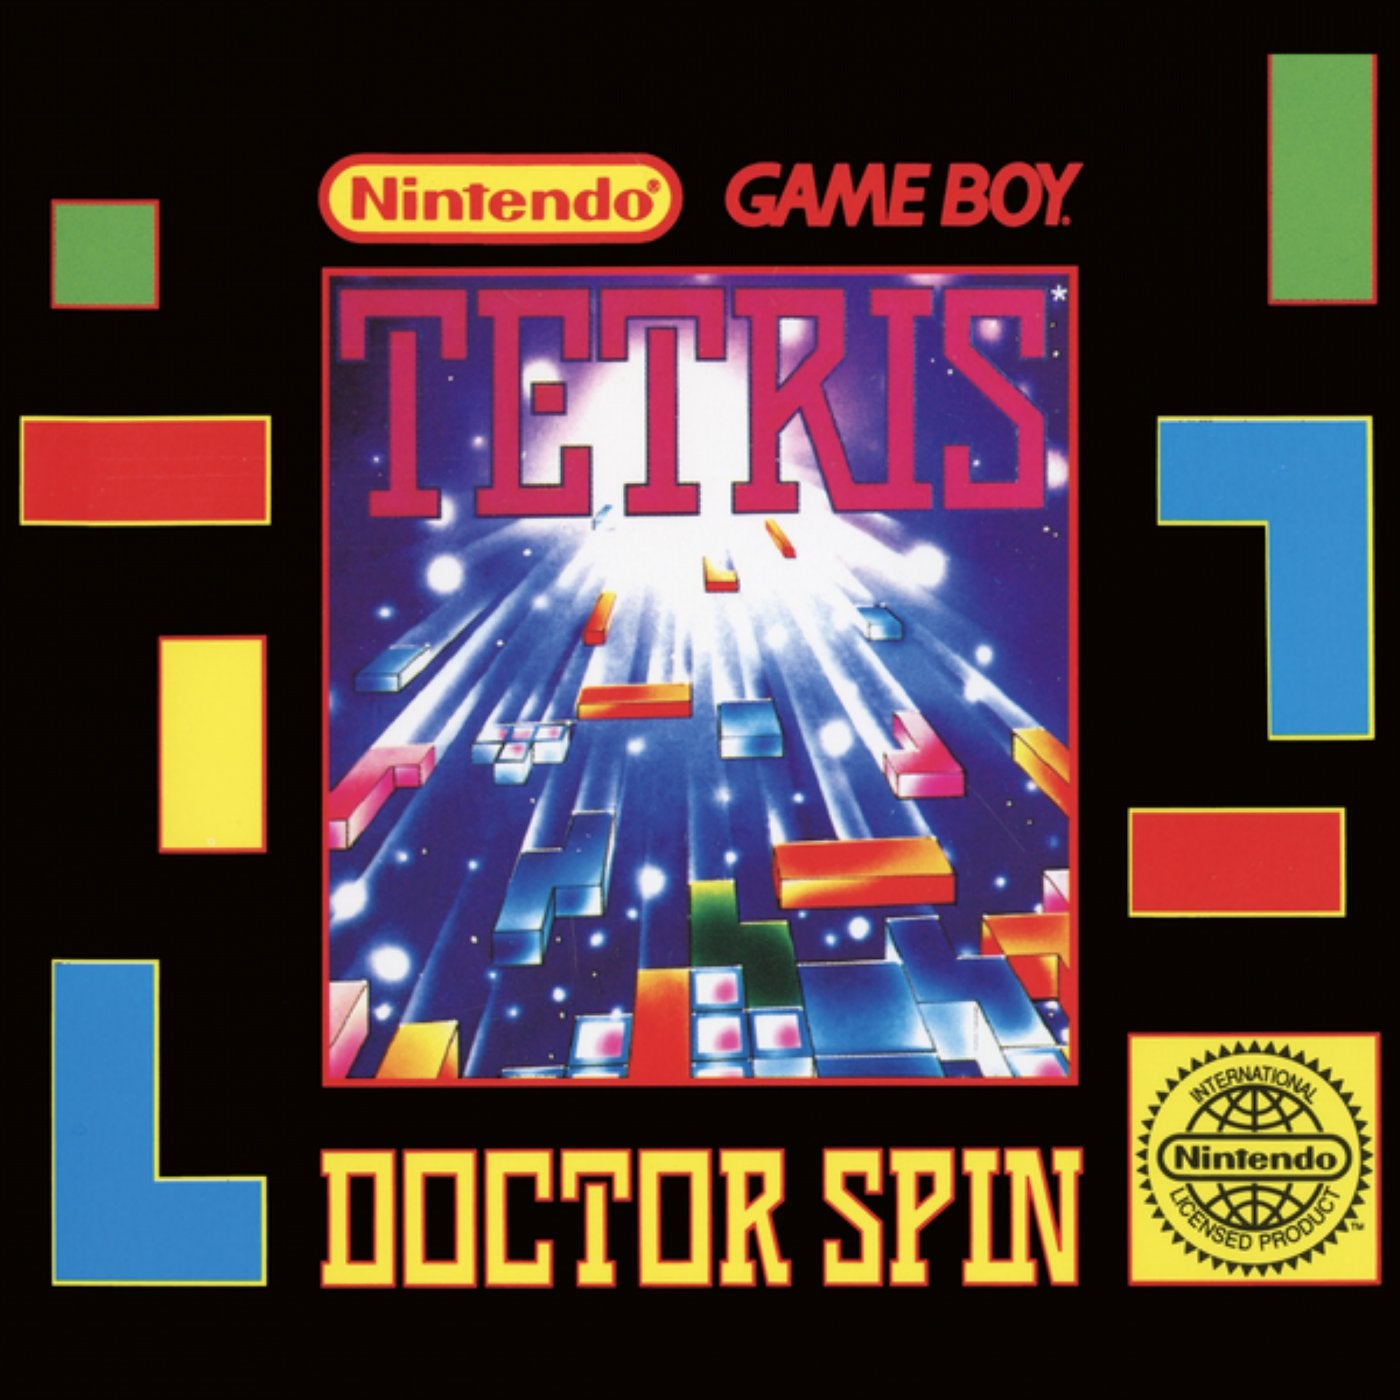 Tetris (Hardcore Mix) by Doctor Spin on Beatport